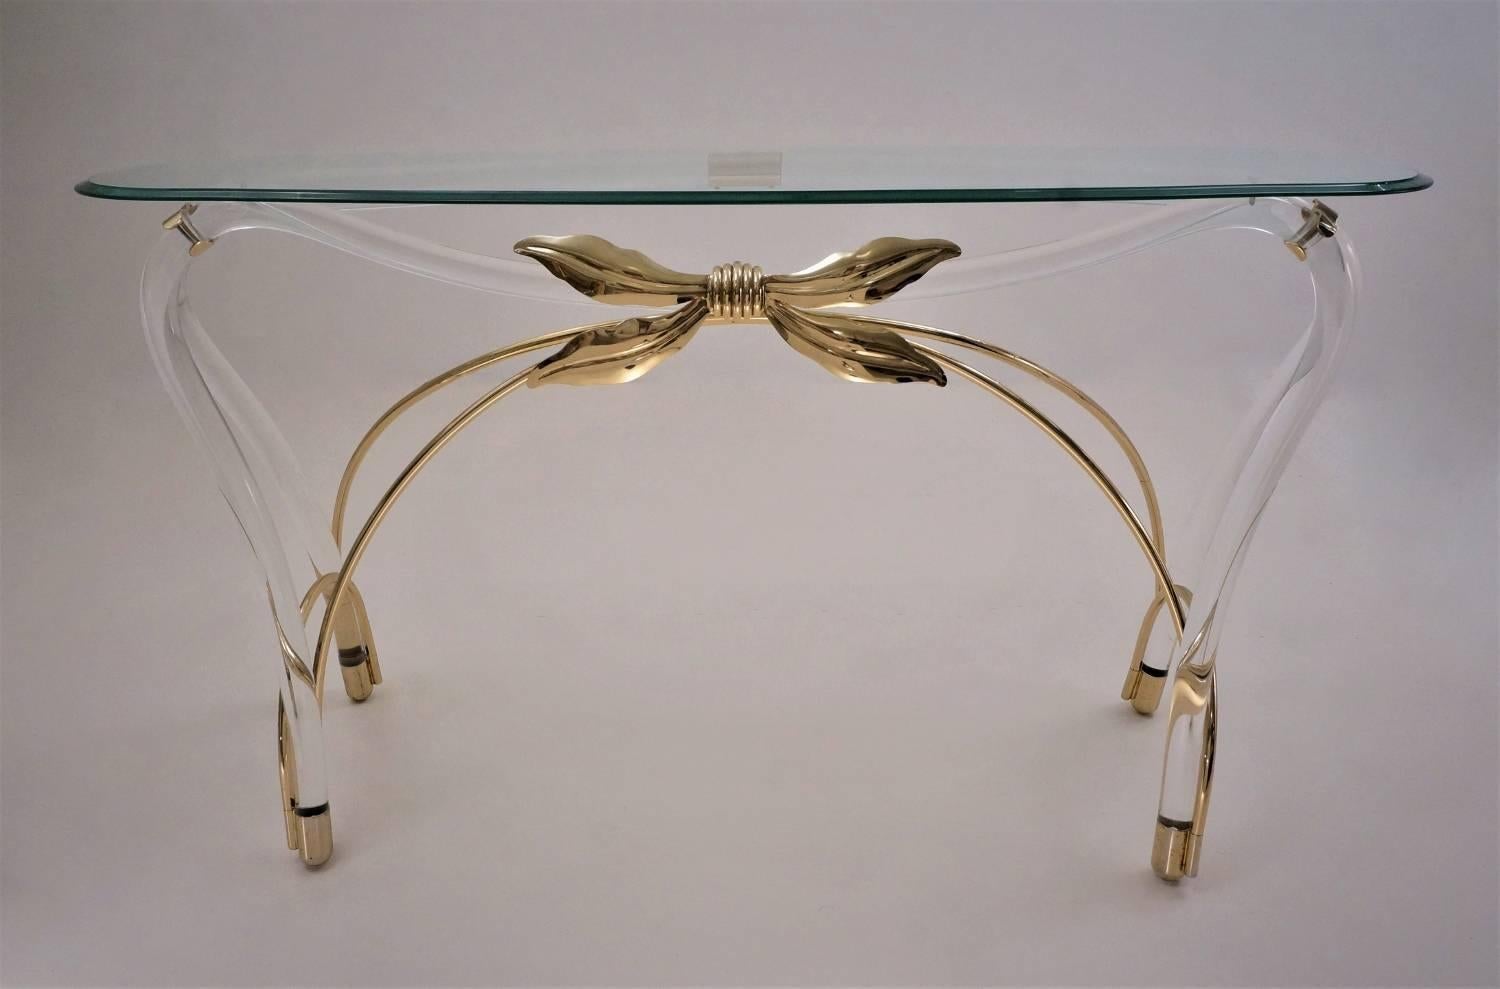 Jeff Messerschmidt console table, Lucite, gold plate gilt and glass, circa 1970s, American.

This console table has been gently cleaned while respecting the vintage patina and is ready to use. The curving glass top with bevelled edge is original